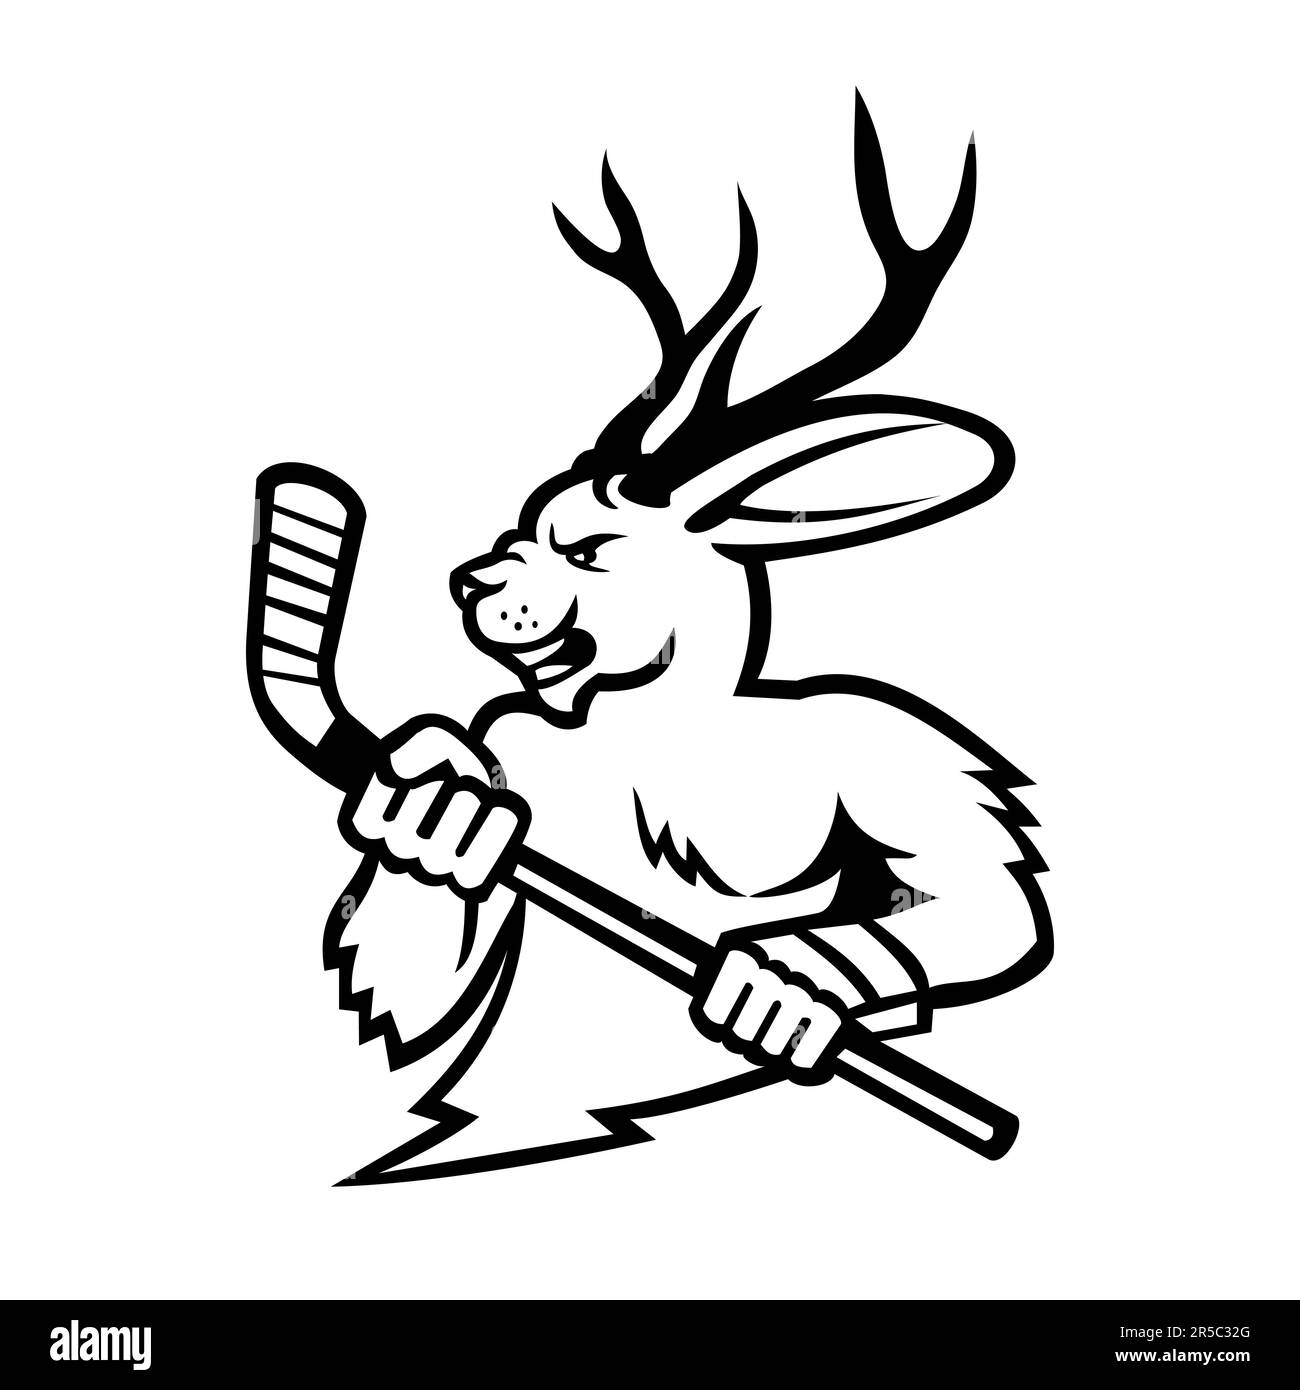 Black and white mascot illustration of head of a jackalope ice hockey player holding an ice hockey stick viewed from side on isolated background in re Stock Photo